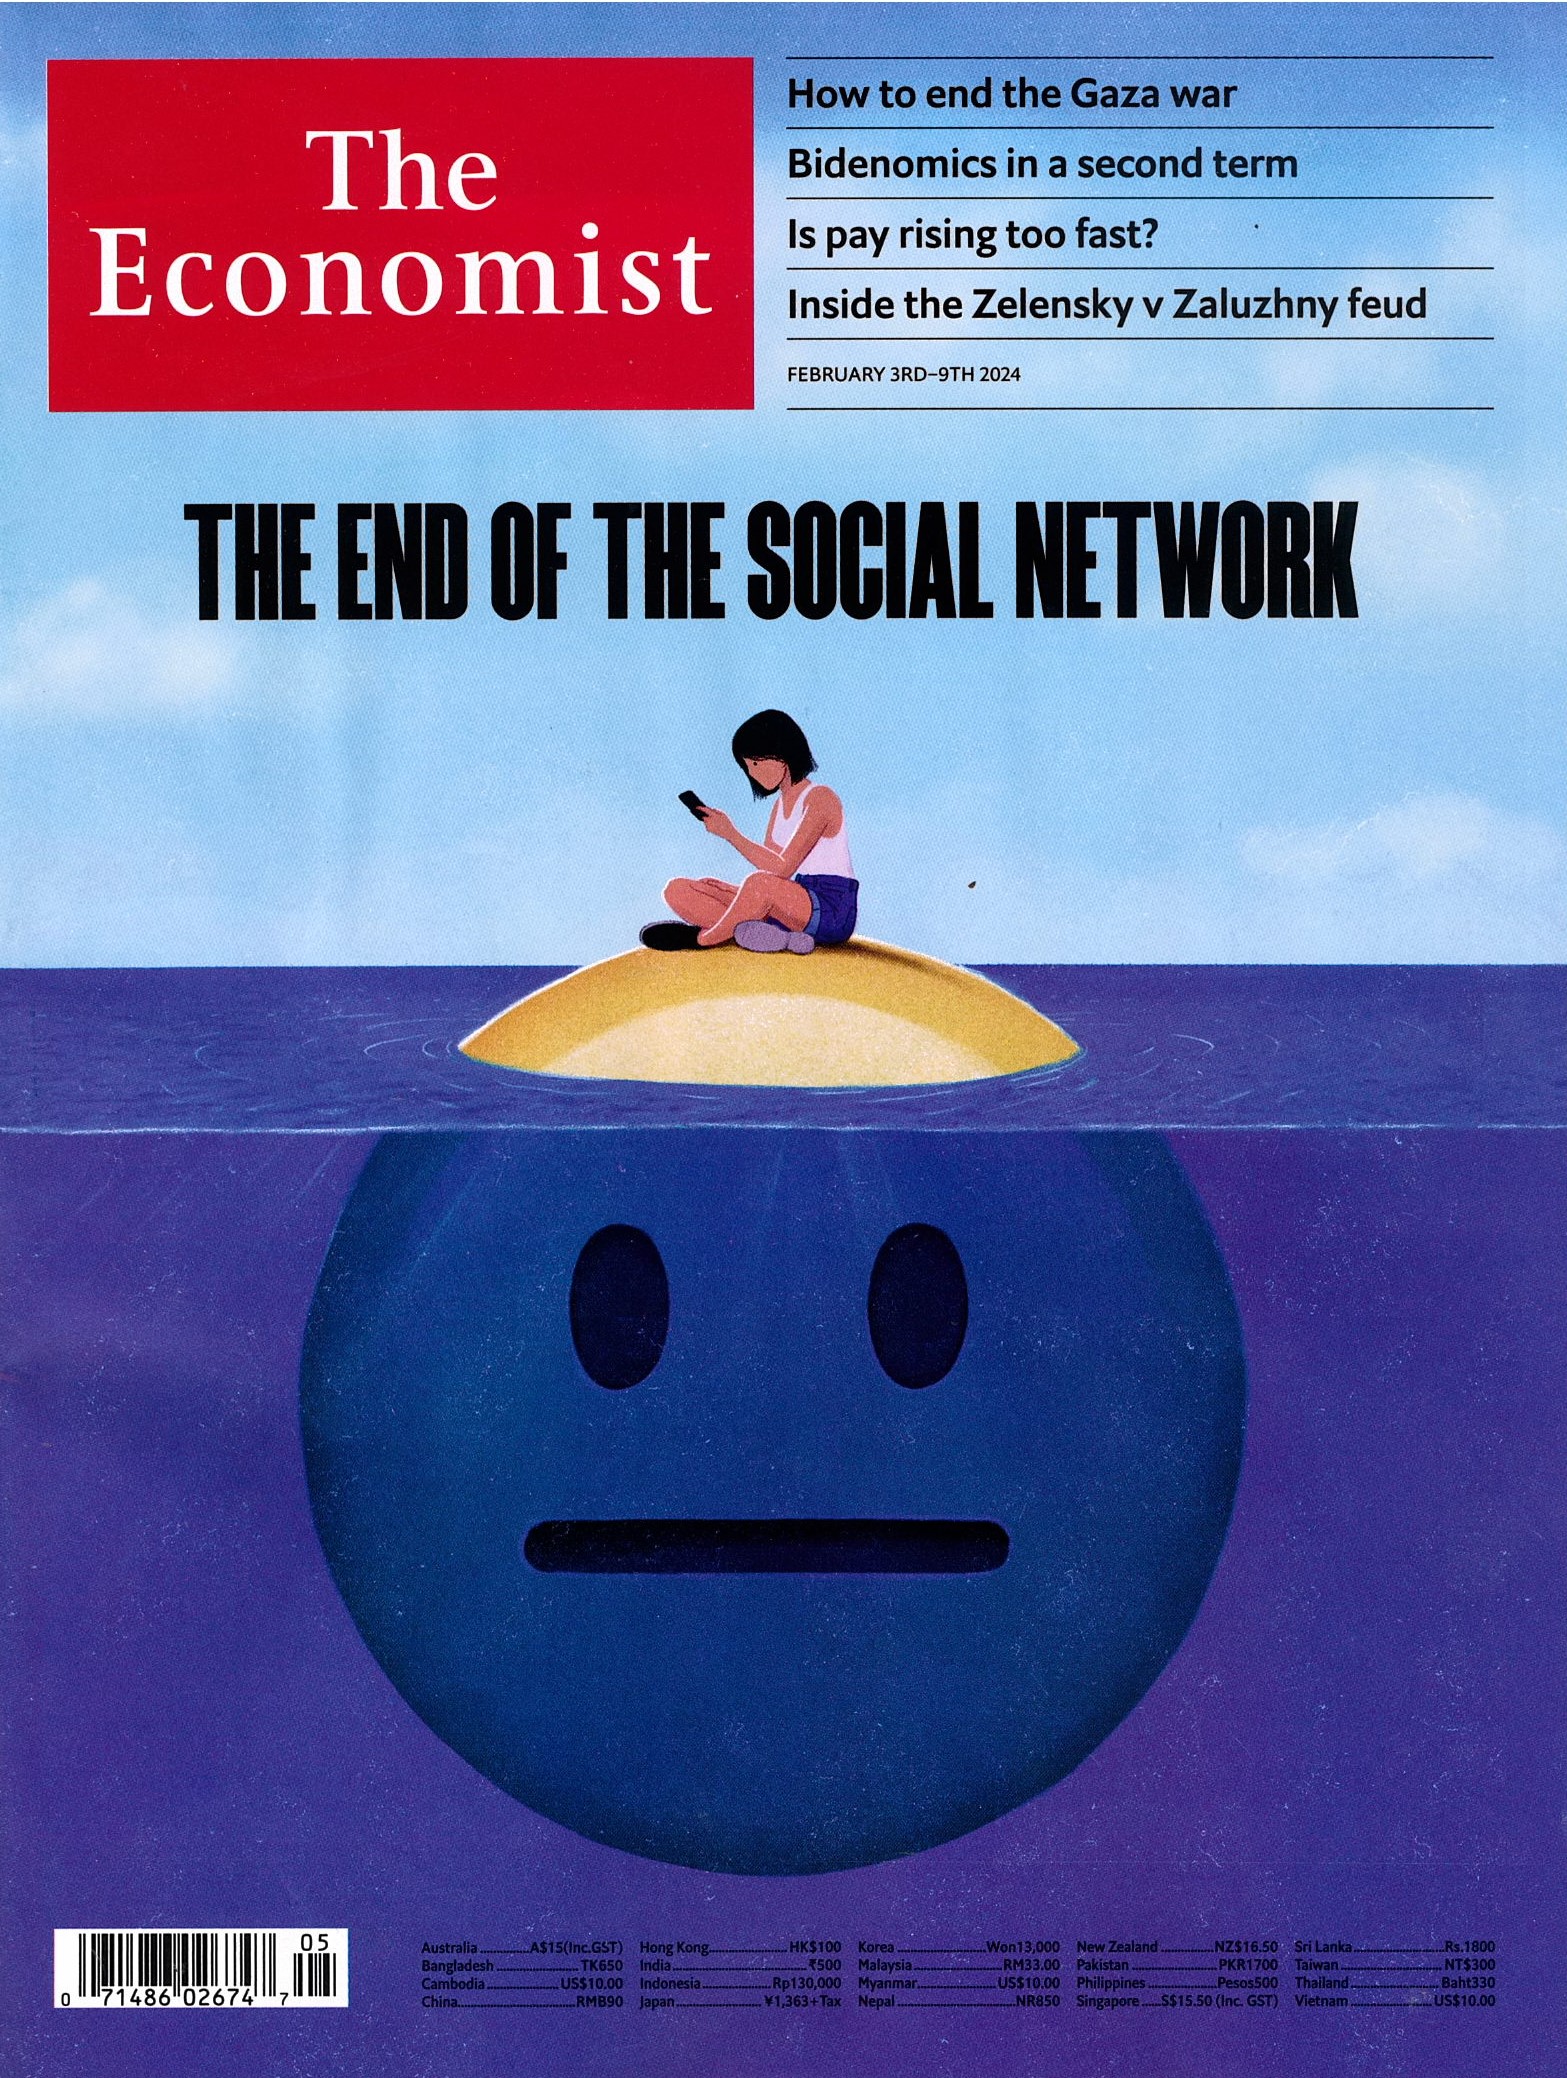 The end of the social network